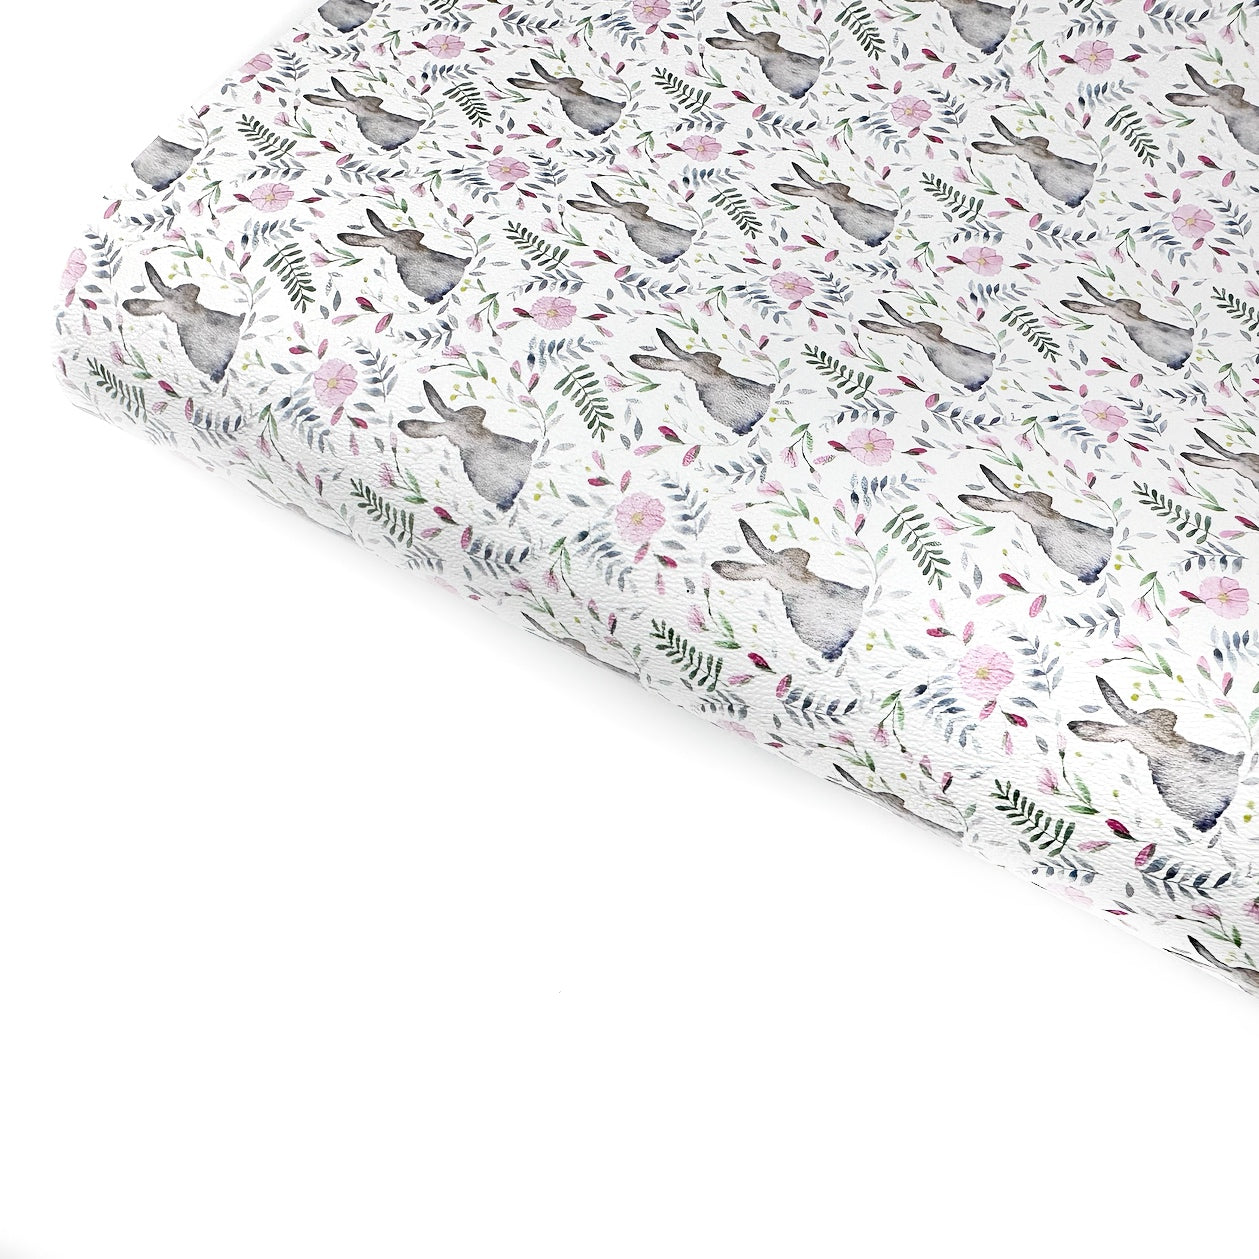 Wild Bunny Premium Faux Leather Fabric Sheets